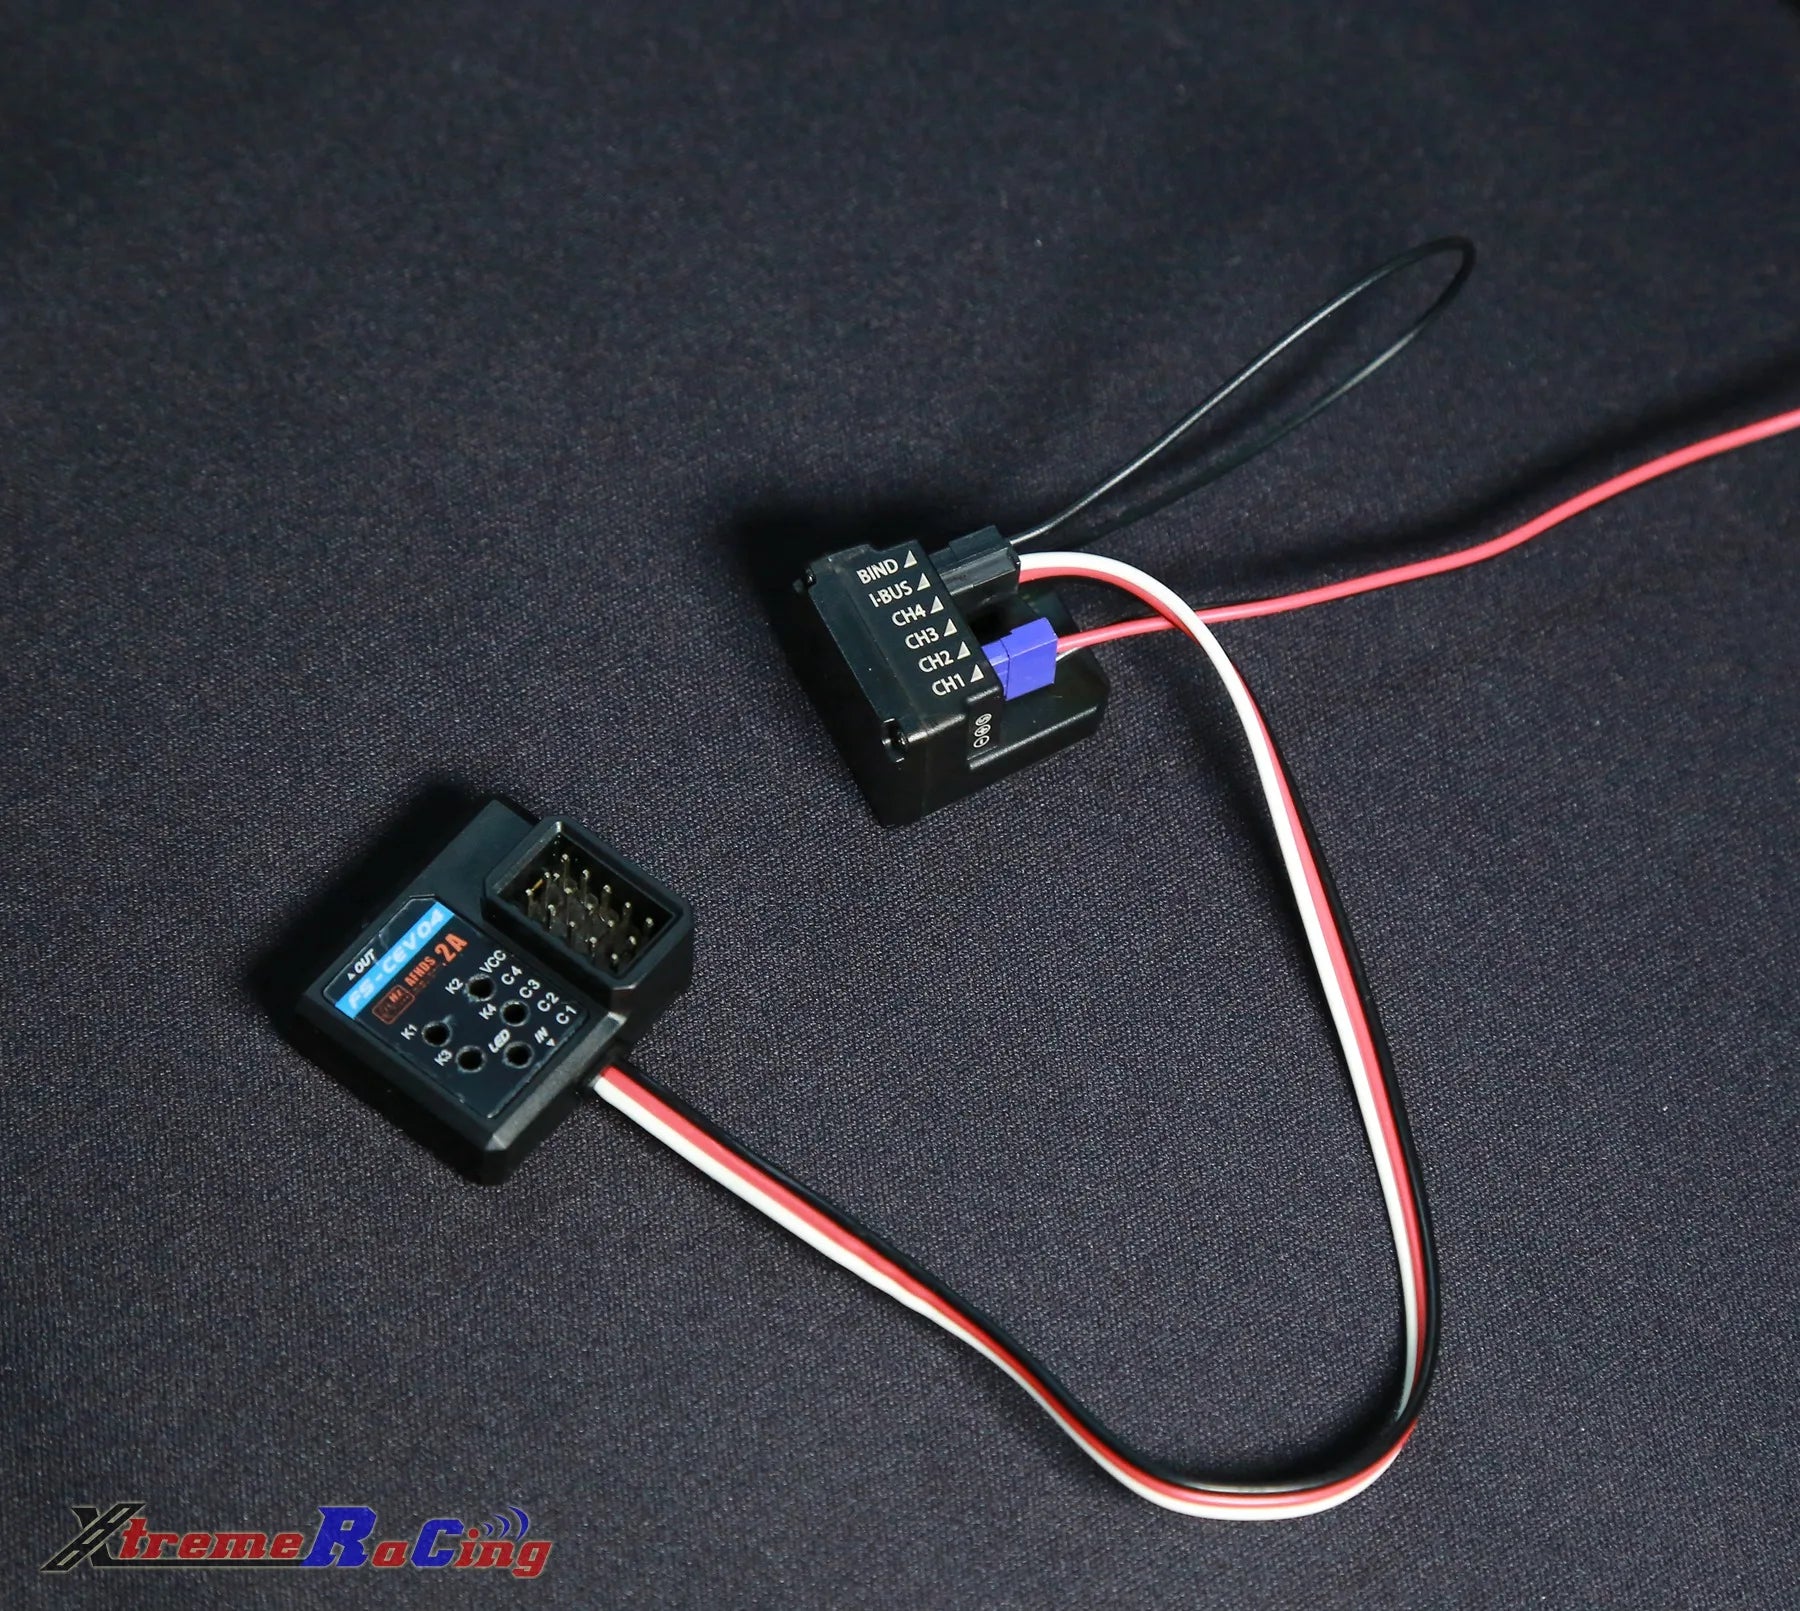 FLYSKY FS-CEV04, an additional 4 channel outputs will be added after the above receiver is used) Suitable model